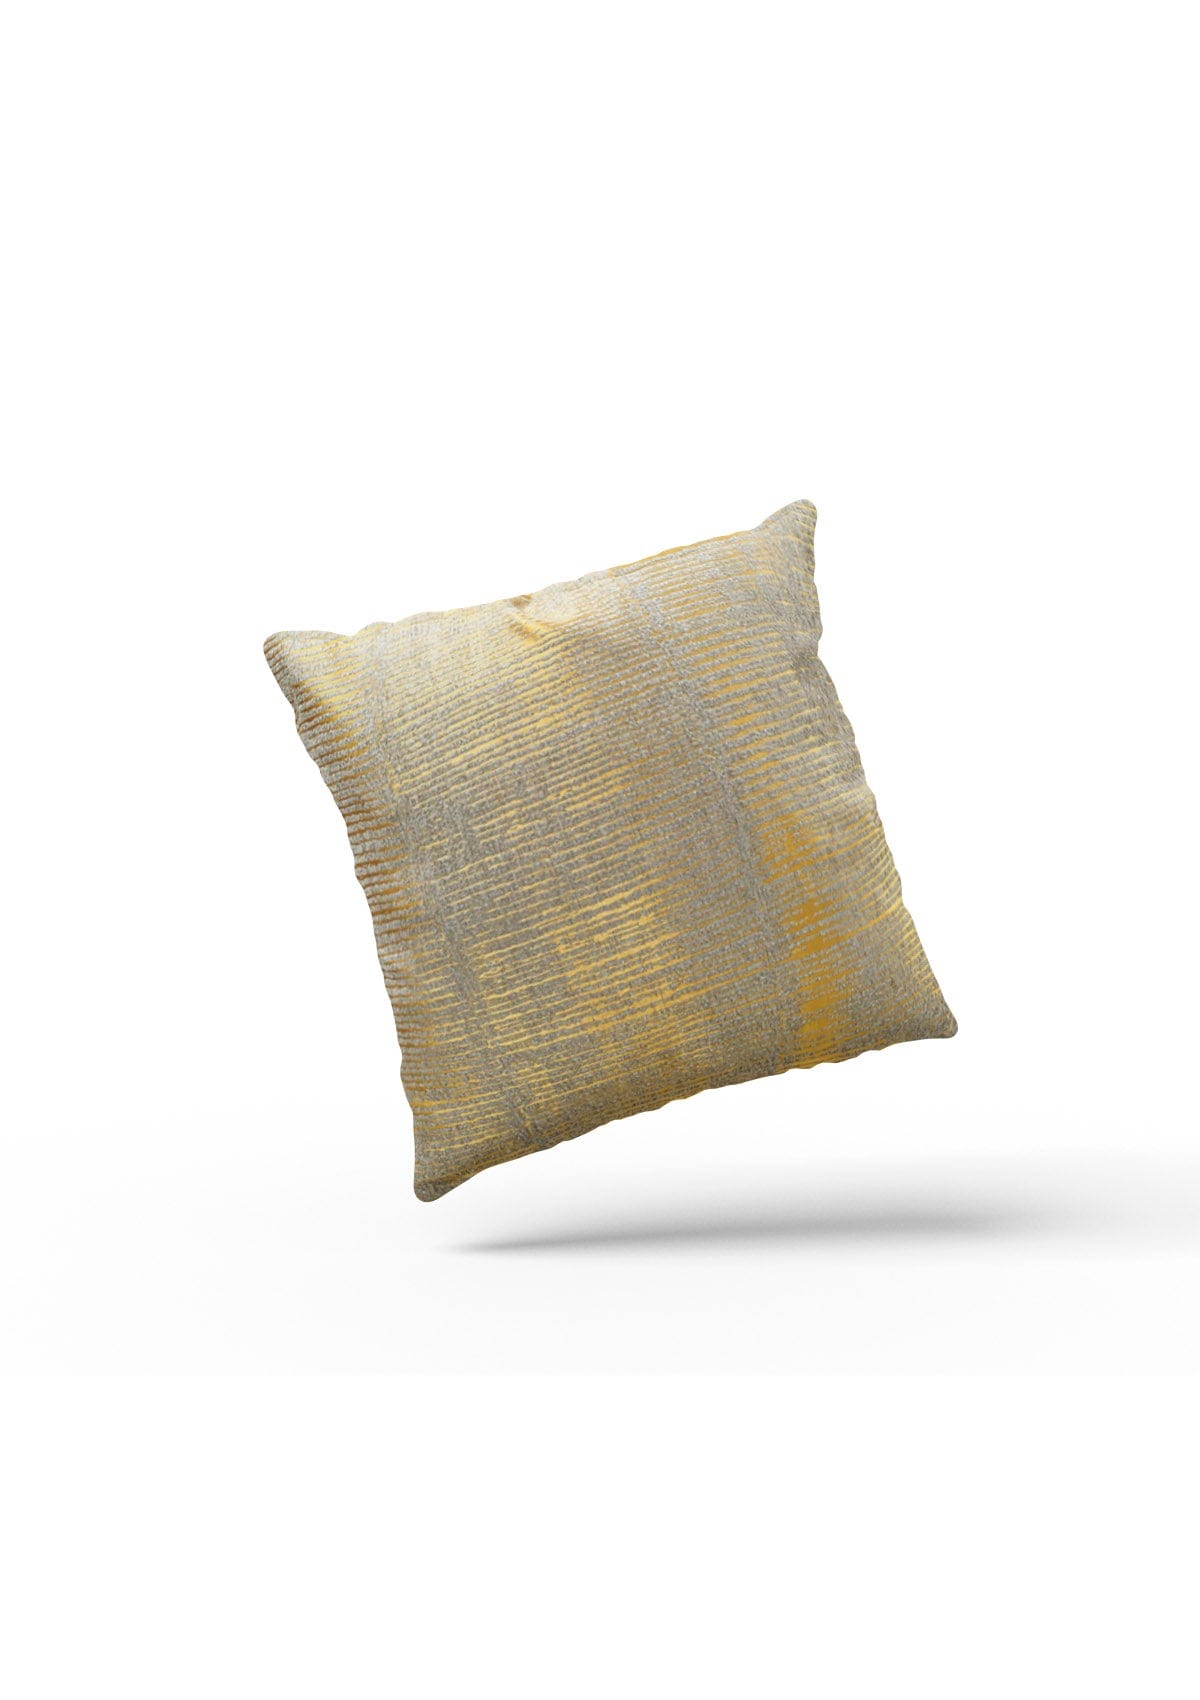 Gold Glitter Cushion Covers | CovermyCushion